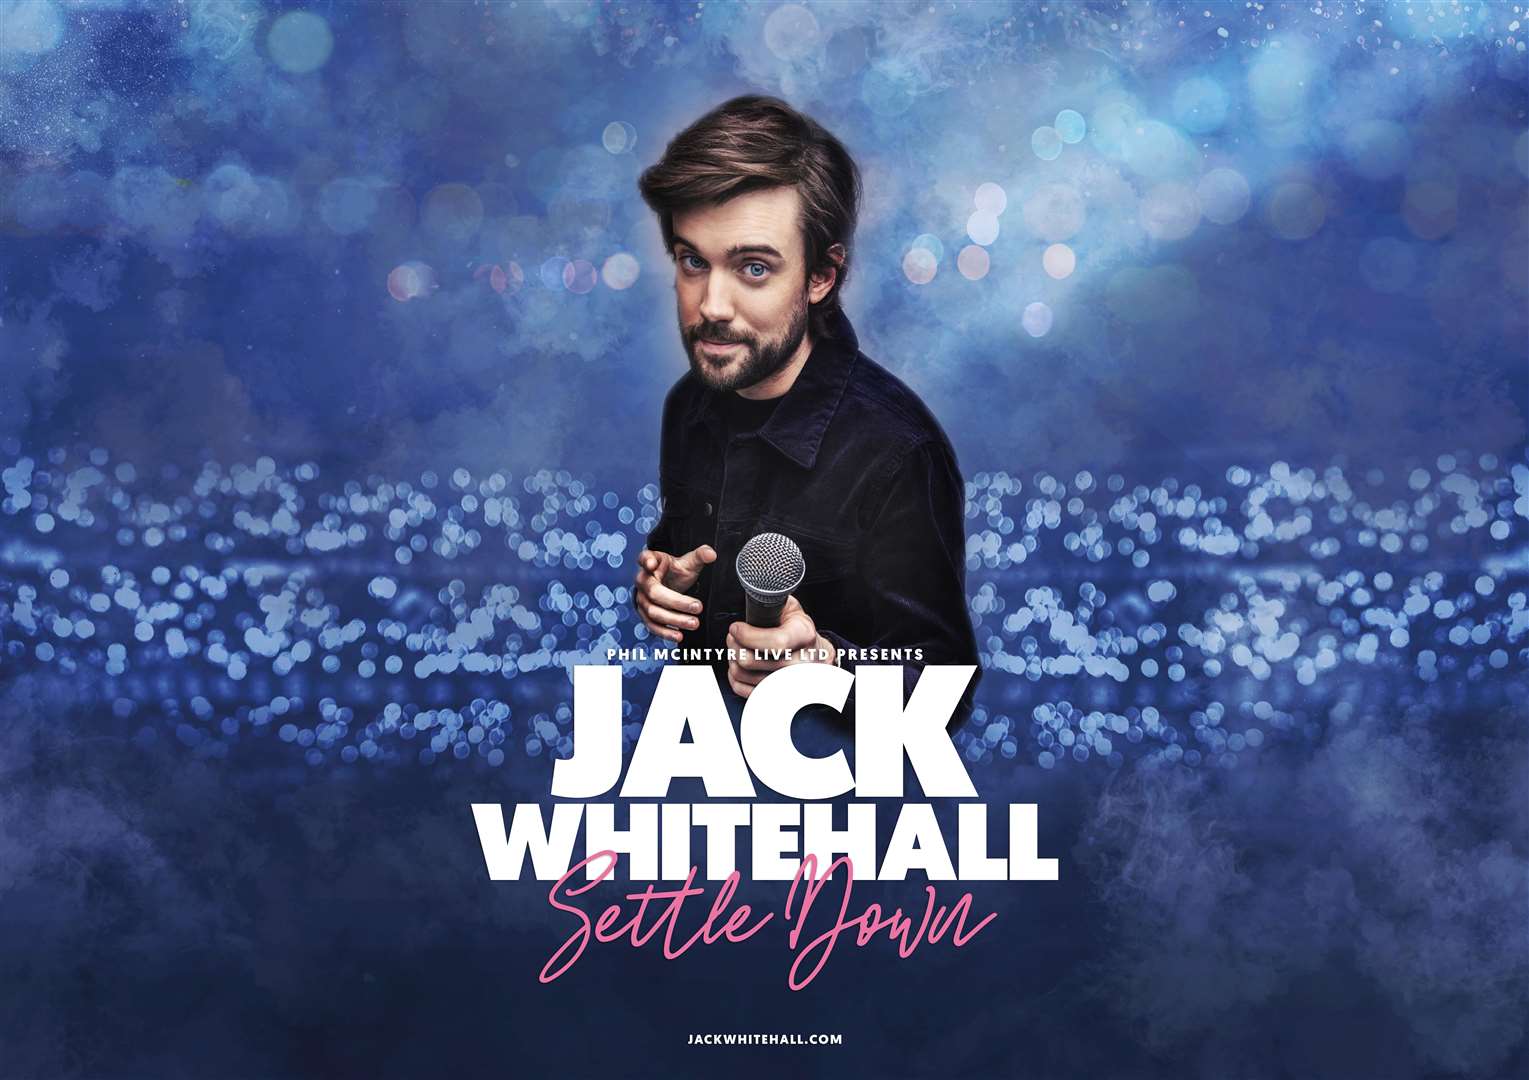 Jack Whitehall: Settle Down, comes to Aberdeen.